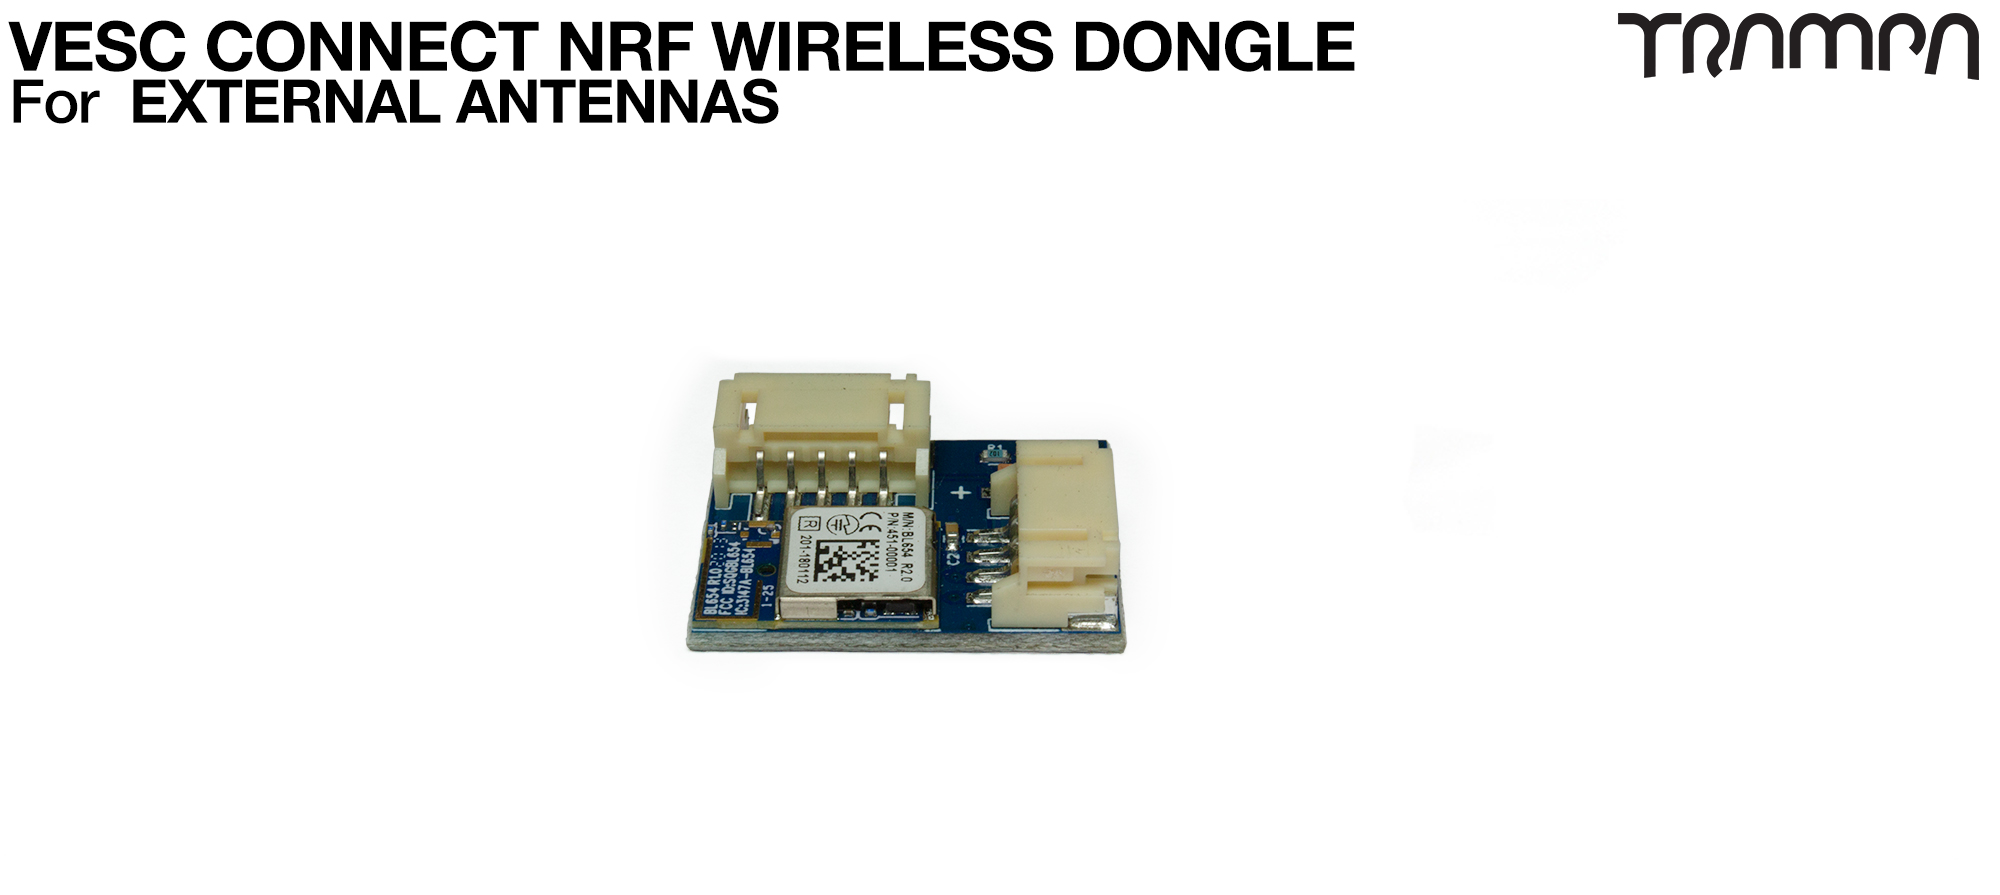 EXTERNAL ARIAL NRF Dongle (+£35)